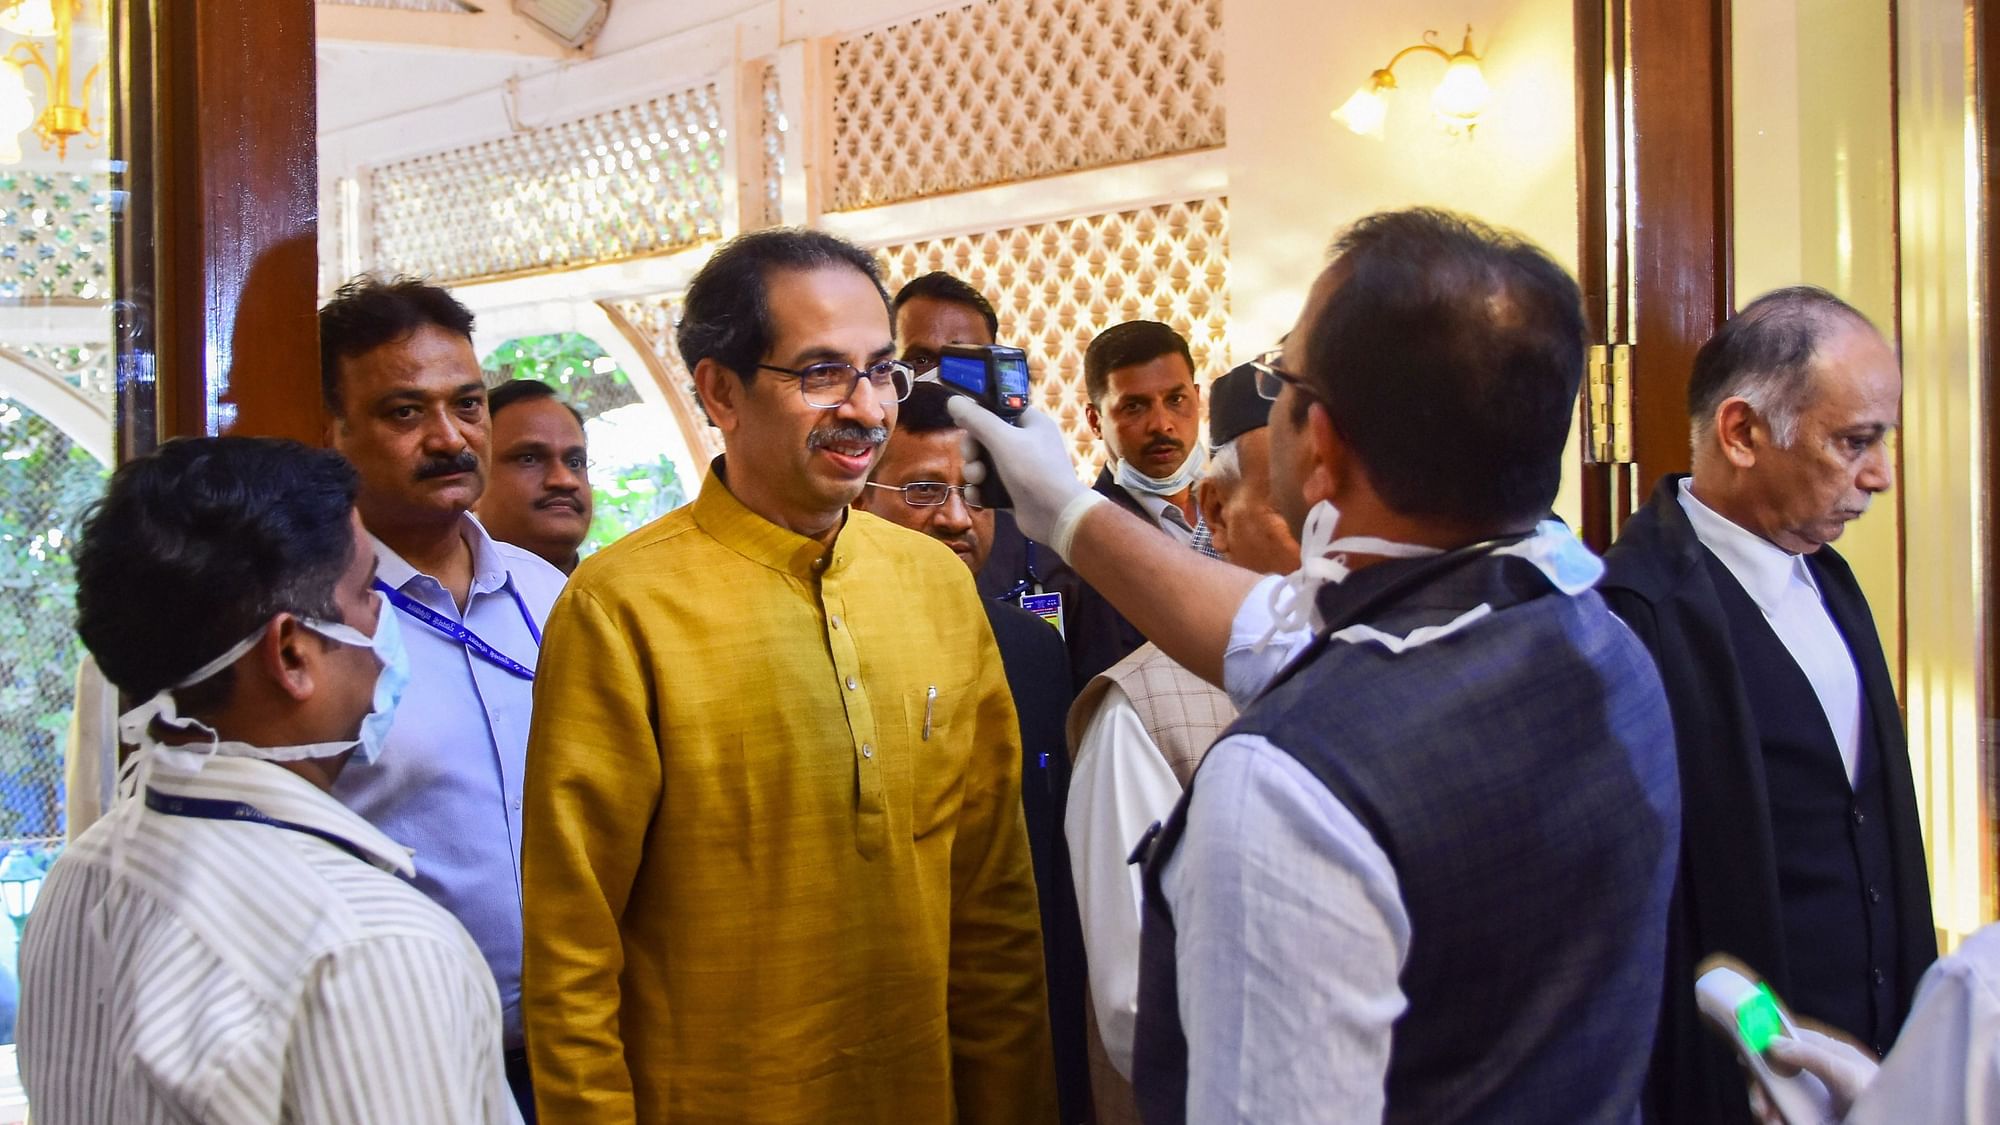 File Image: An official uses a thermal screening device on Maharashtra Chief Minister Uddhav Thackeray, in wake of deadly coronavirus outbreak.